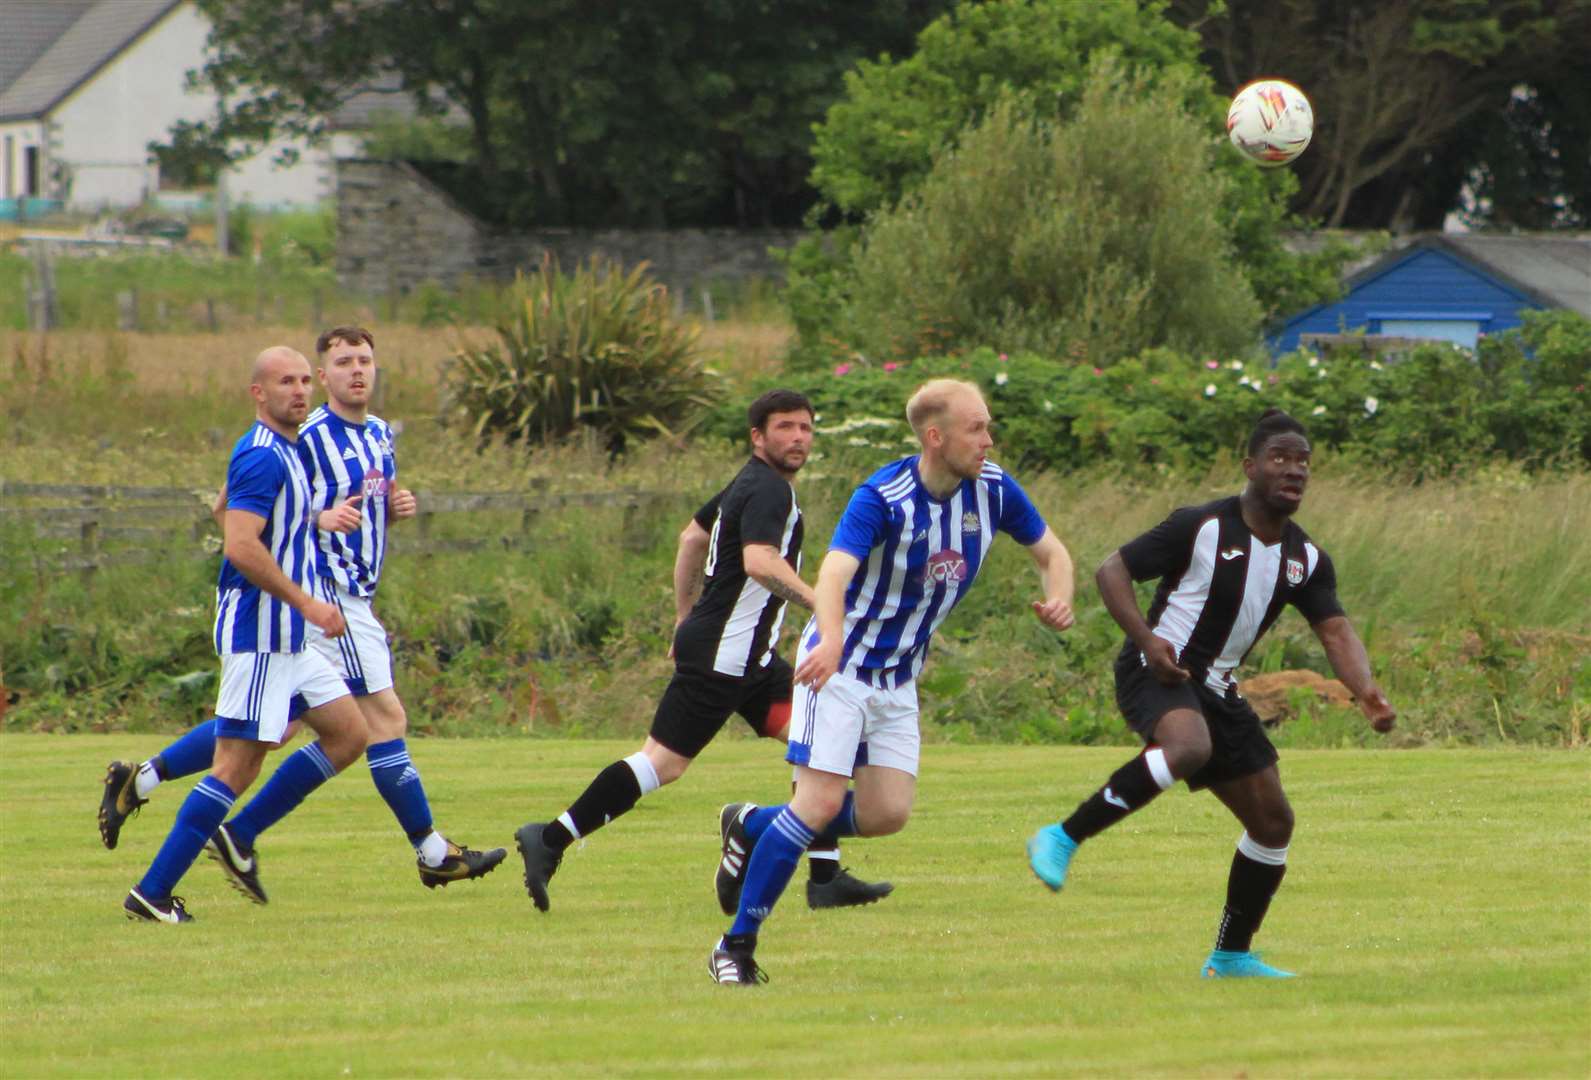 Action from Lybster's 1-0 win against Swifts in the first round of the David Allan Shield.